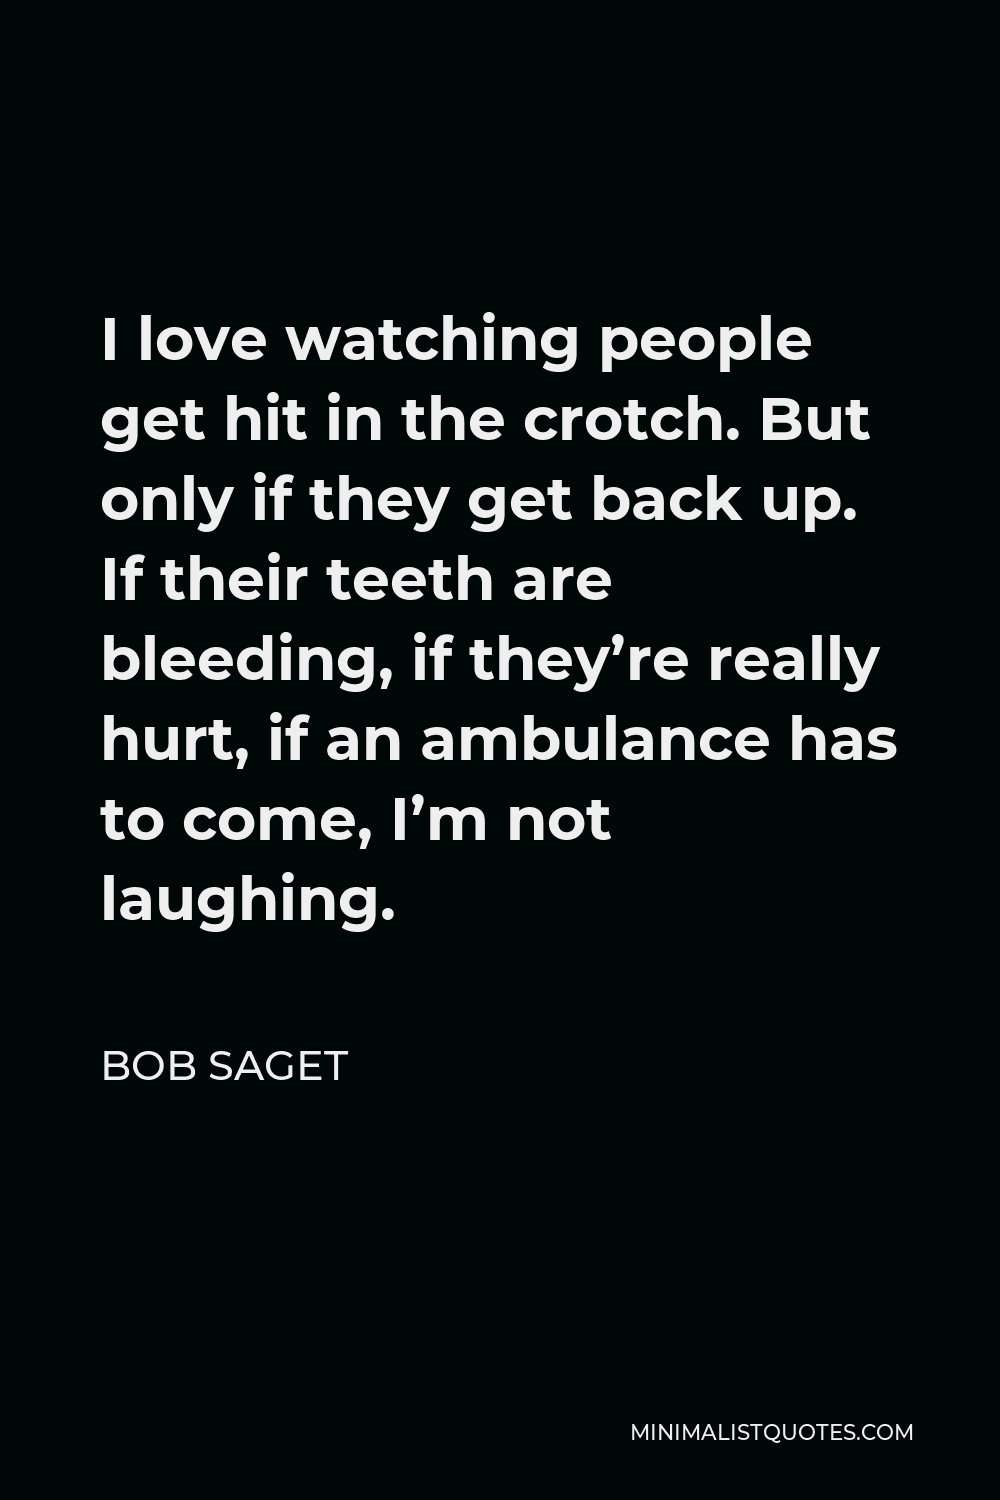 Bob Saget Quote - I love watching people get hit in the crotch. But only if they get back up. If their teeth are bleeding, if they’re really hurt, if an ambulance has to come, I’m not laughing.